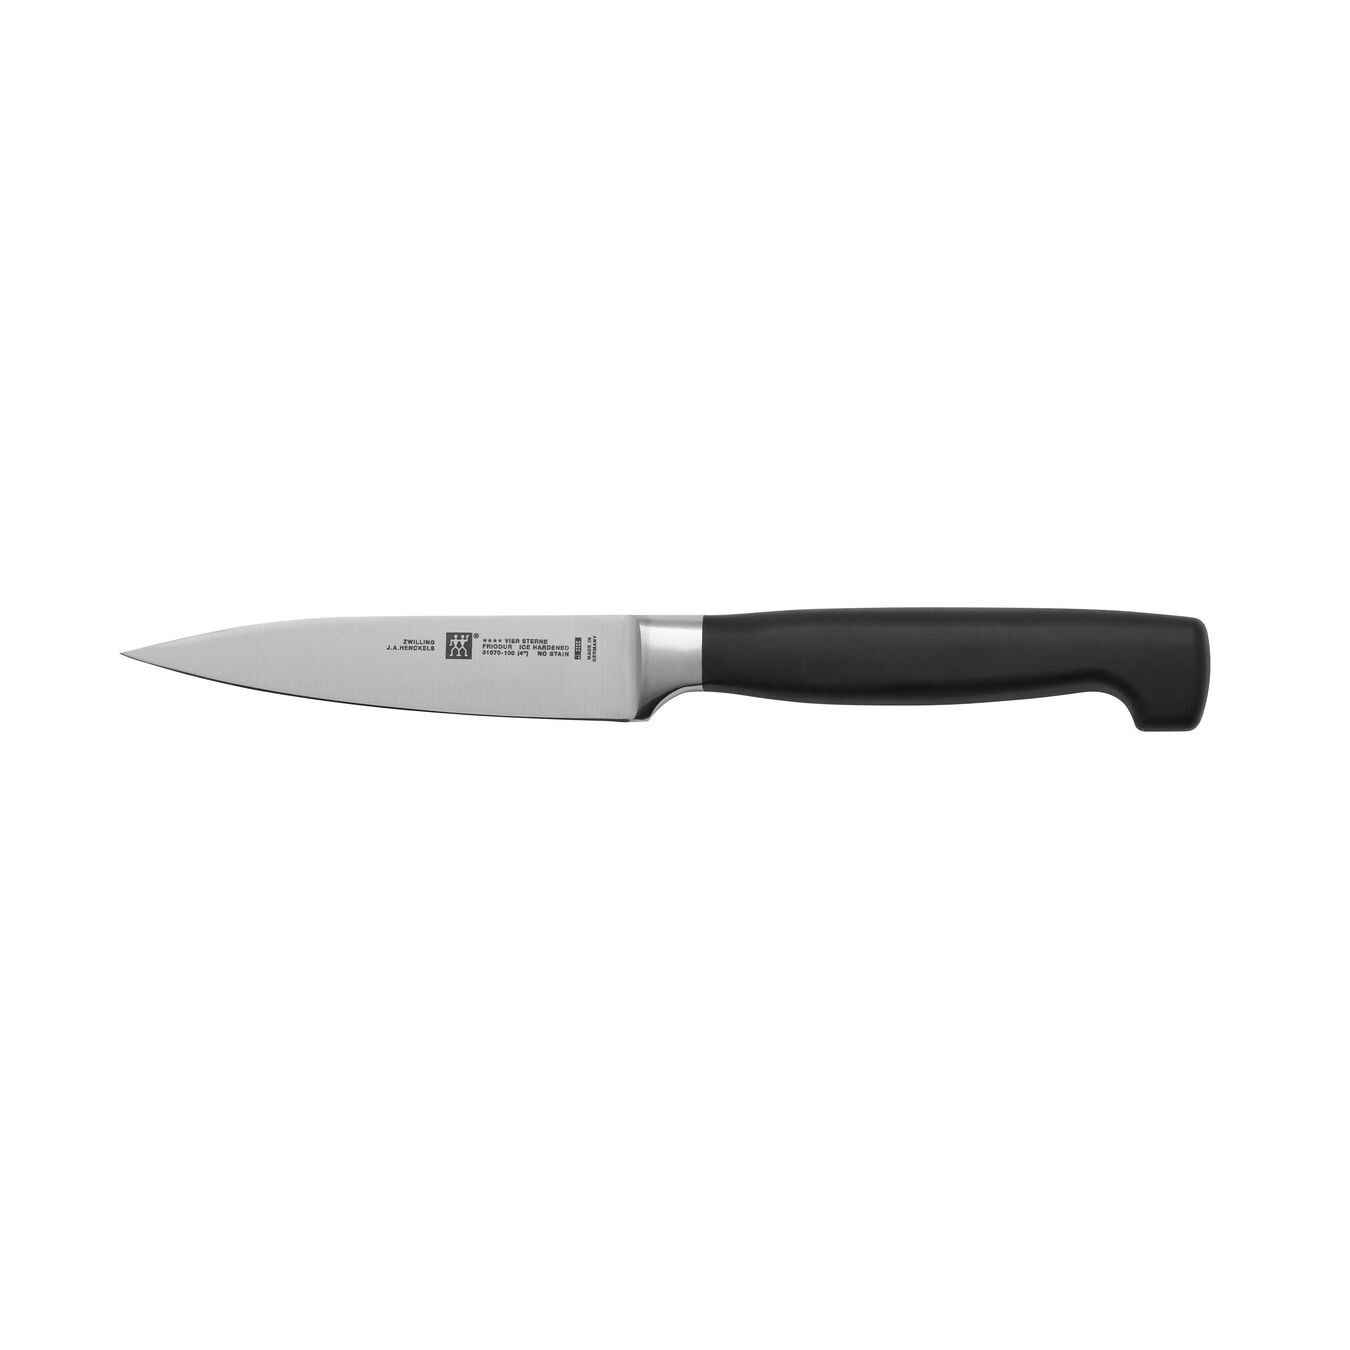 4 inch Paring knife,,large 2